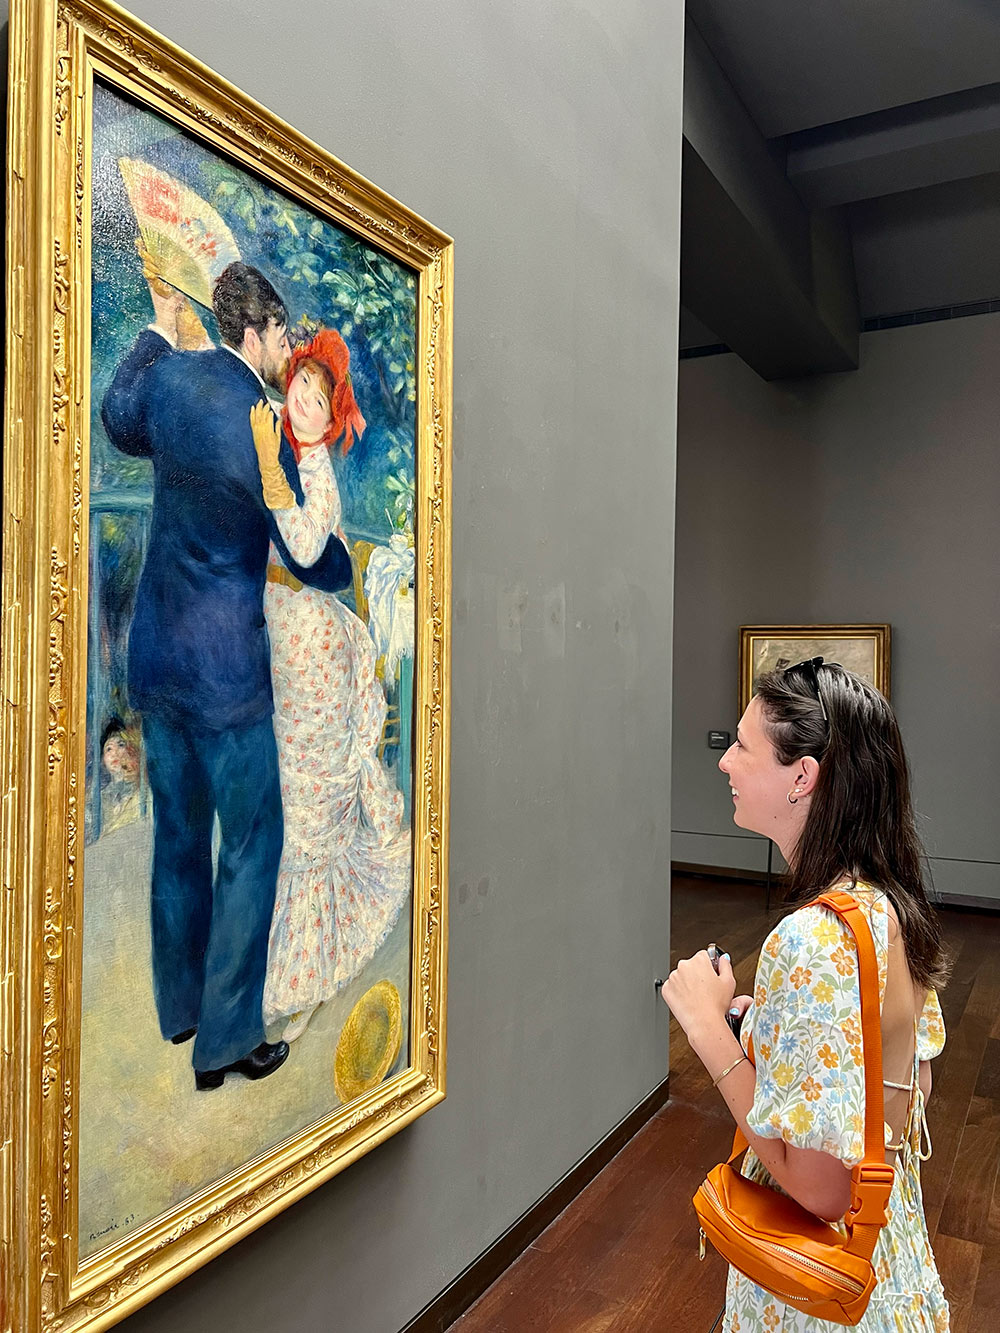 Art student Katherine Nause viewing a painting by the artist Renoir at the Musée d’Orsay in Paris, France.